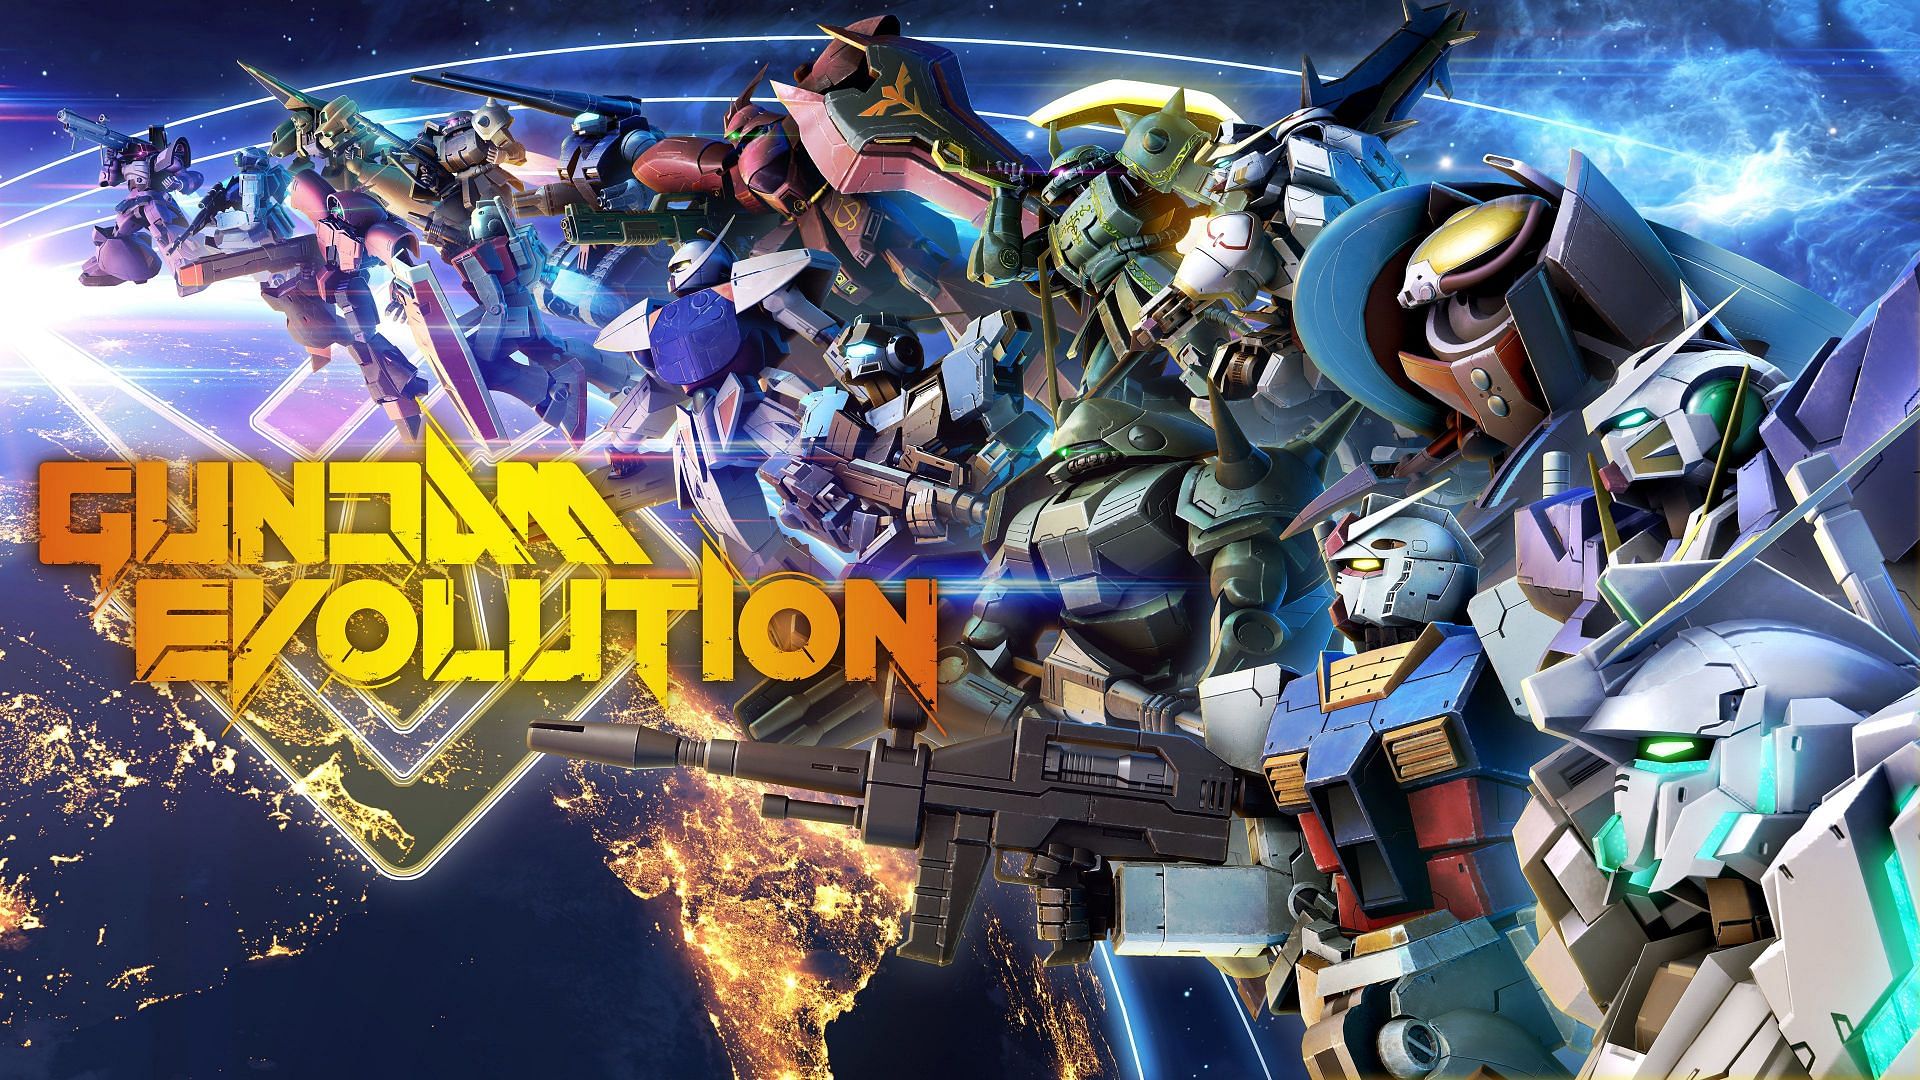 Gundam Evolution has quite a lineup of mobile suits, but which are best suited for new players? (Image via Bandai Namco)